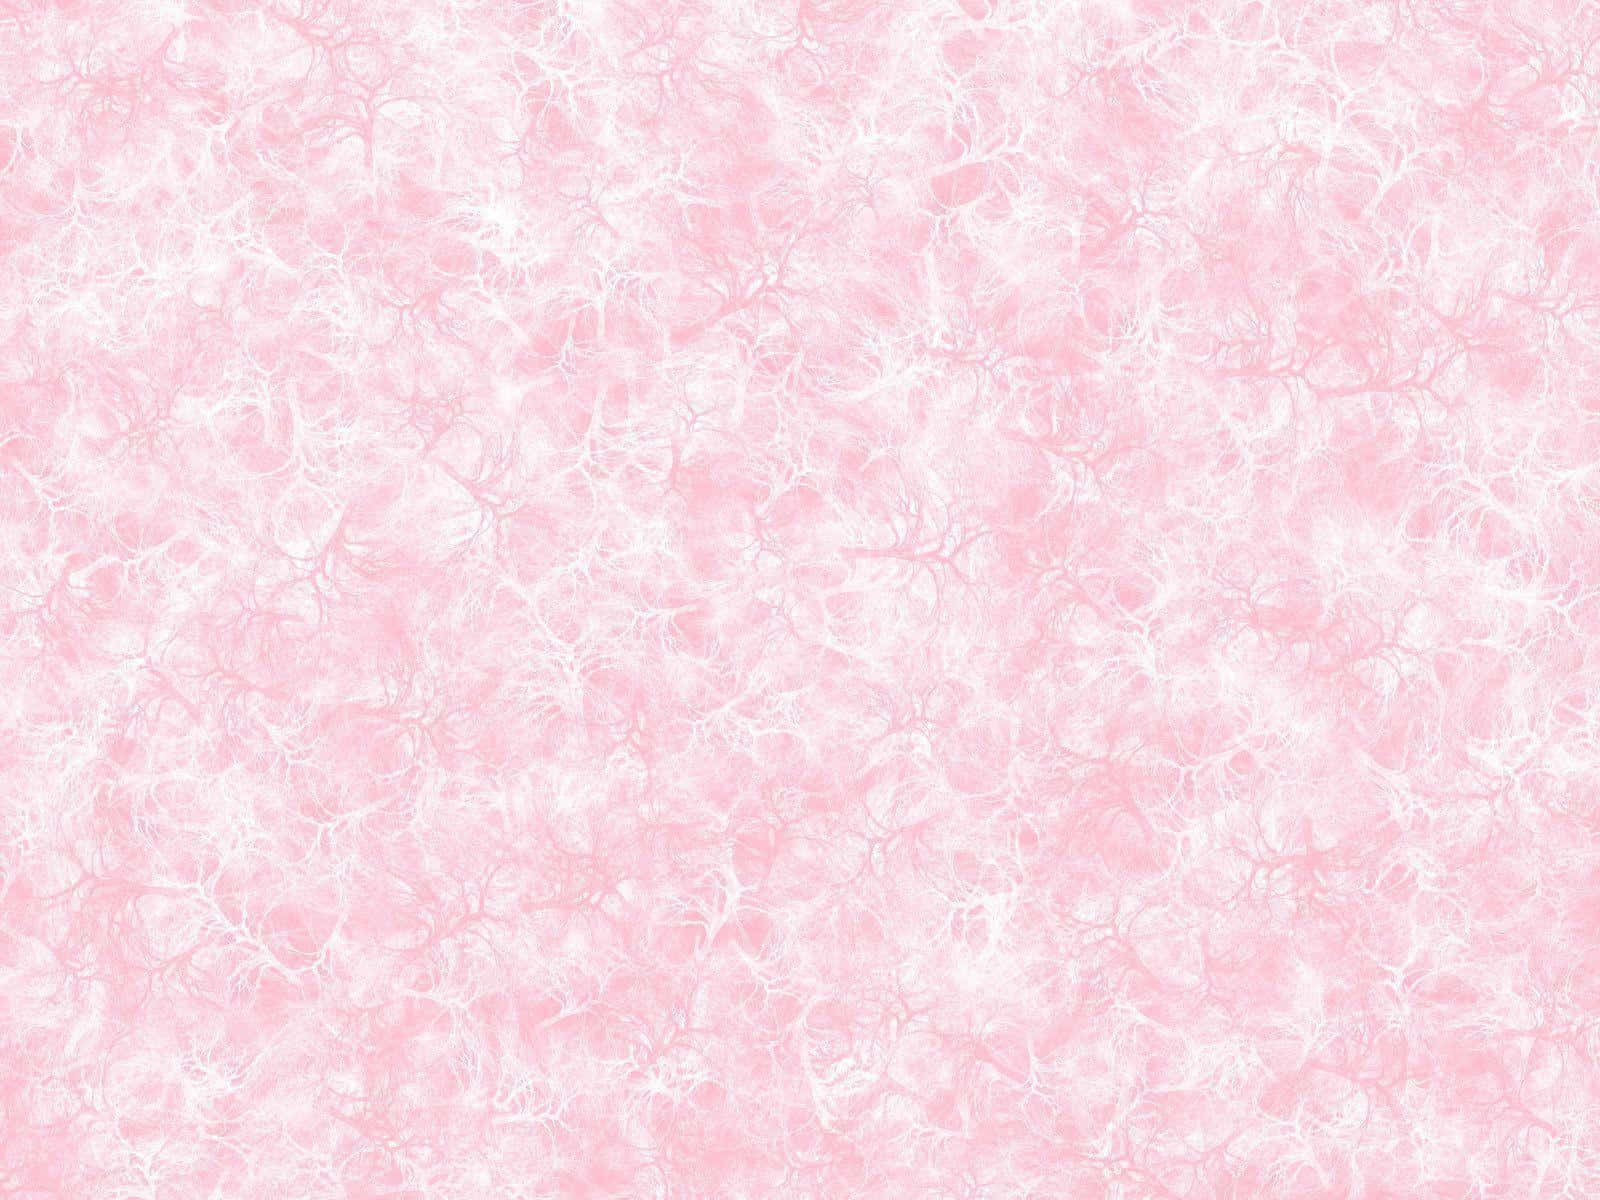 Enjoy the calming atmosphere of a Soft Pink background.